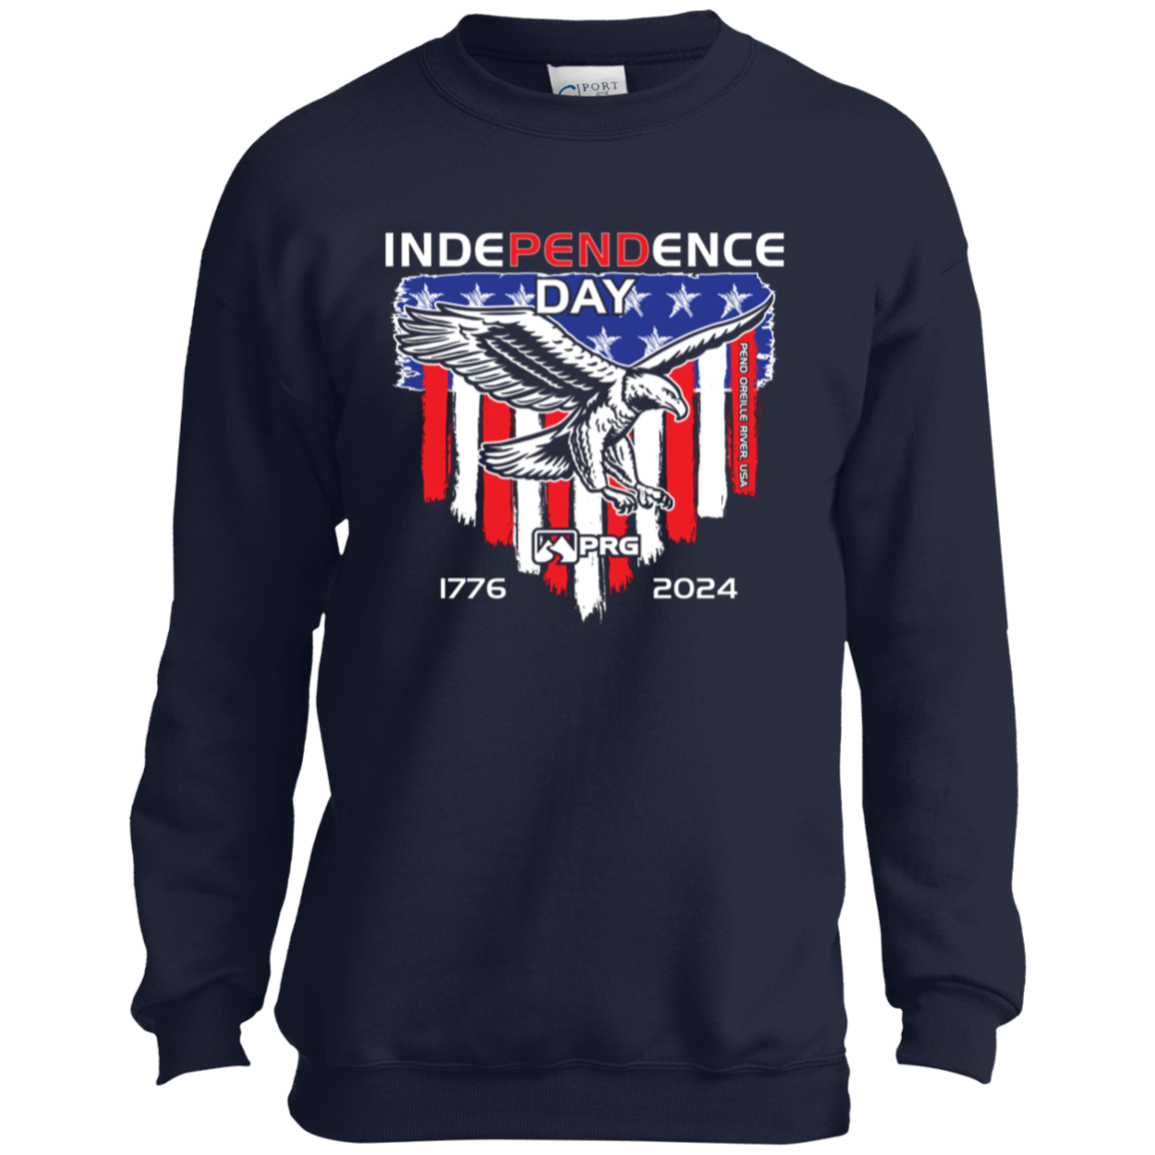 2024 Independence Day - Youth Sweatshirt